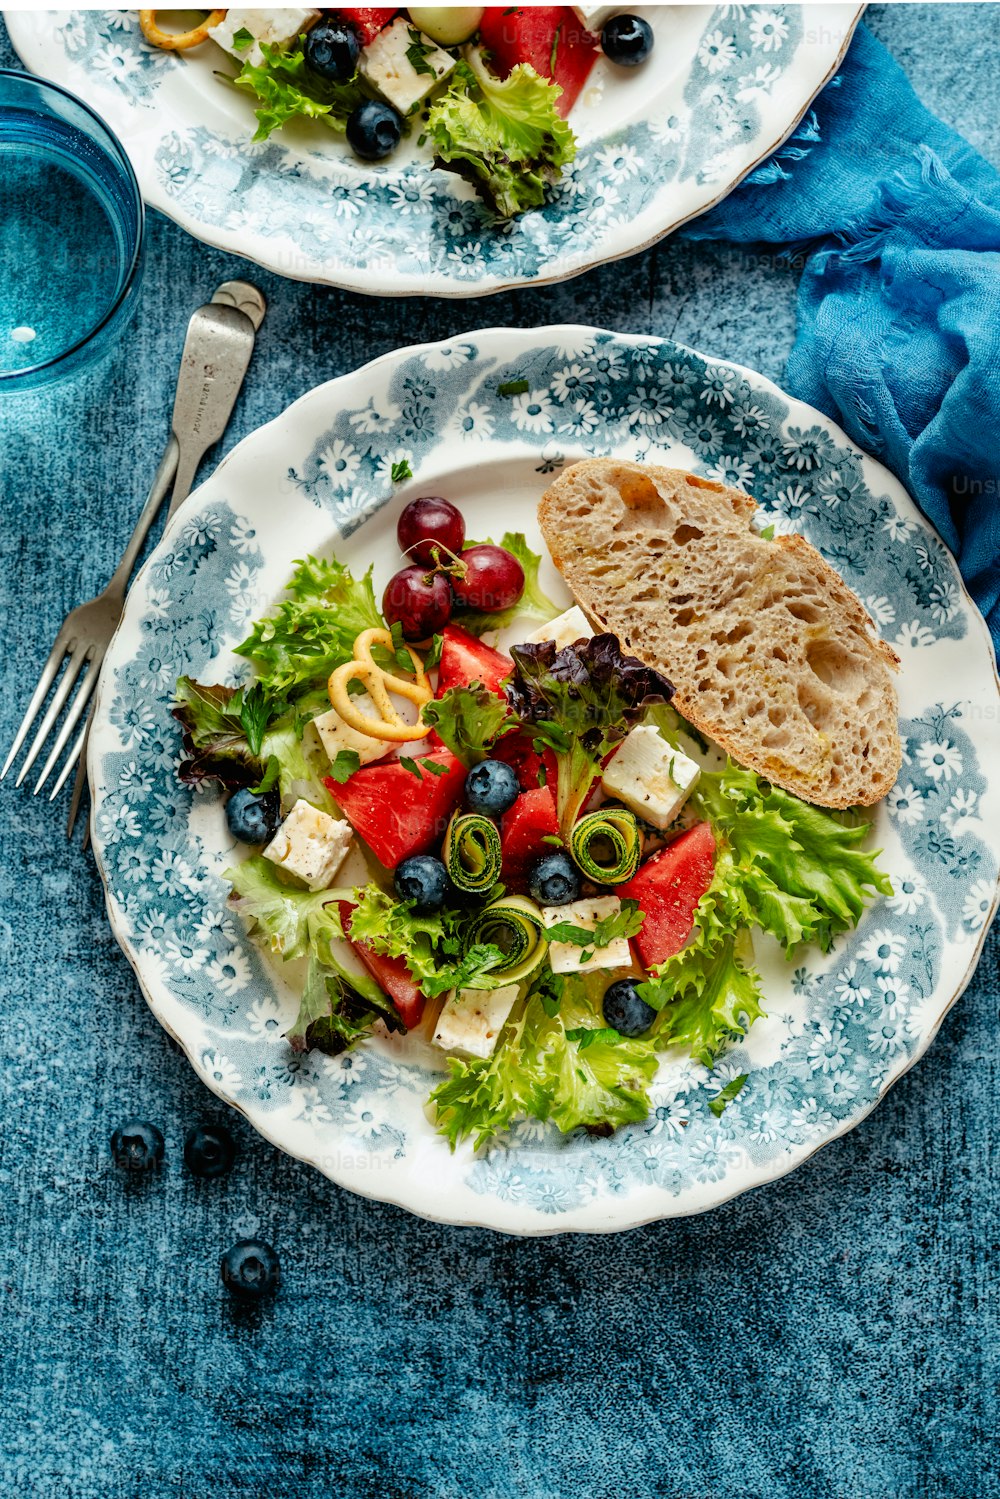 two plates of salad with bread and blueberries